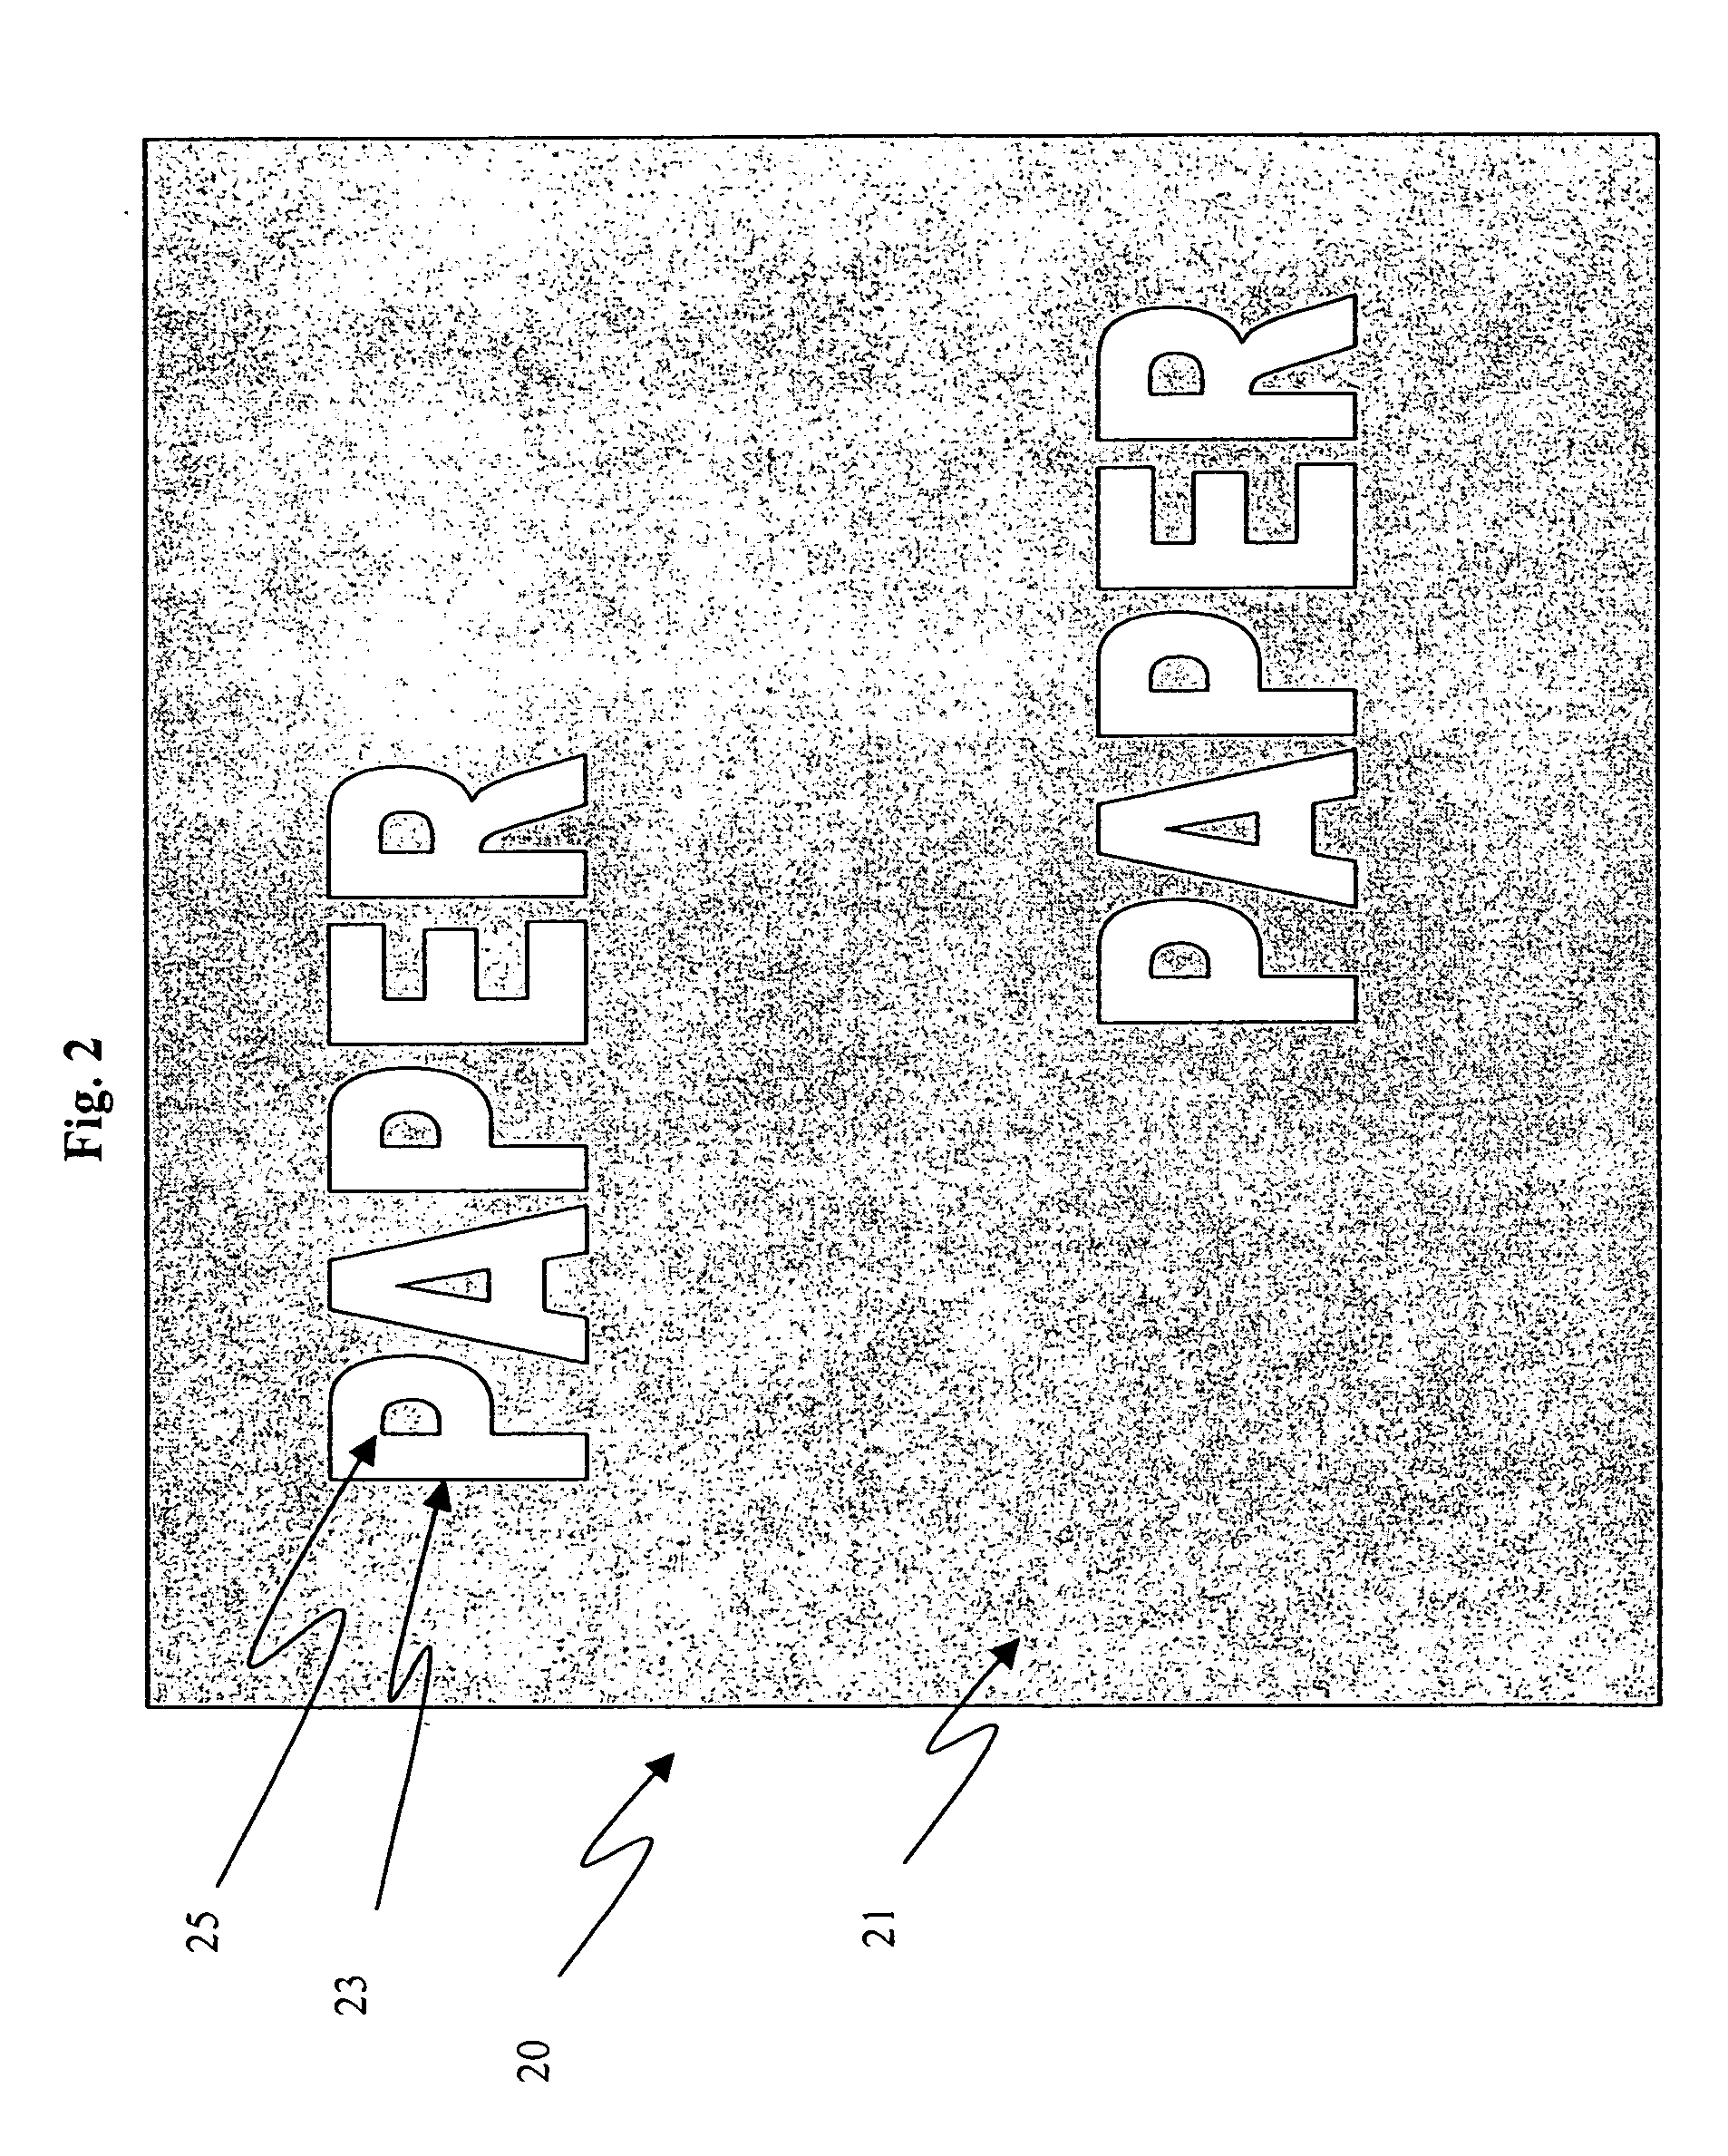 Antistatic conductive grid pattern with integral logo